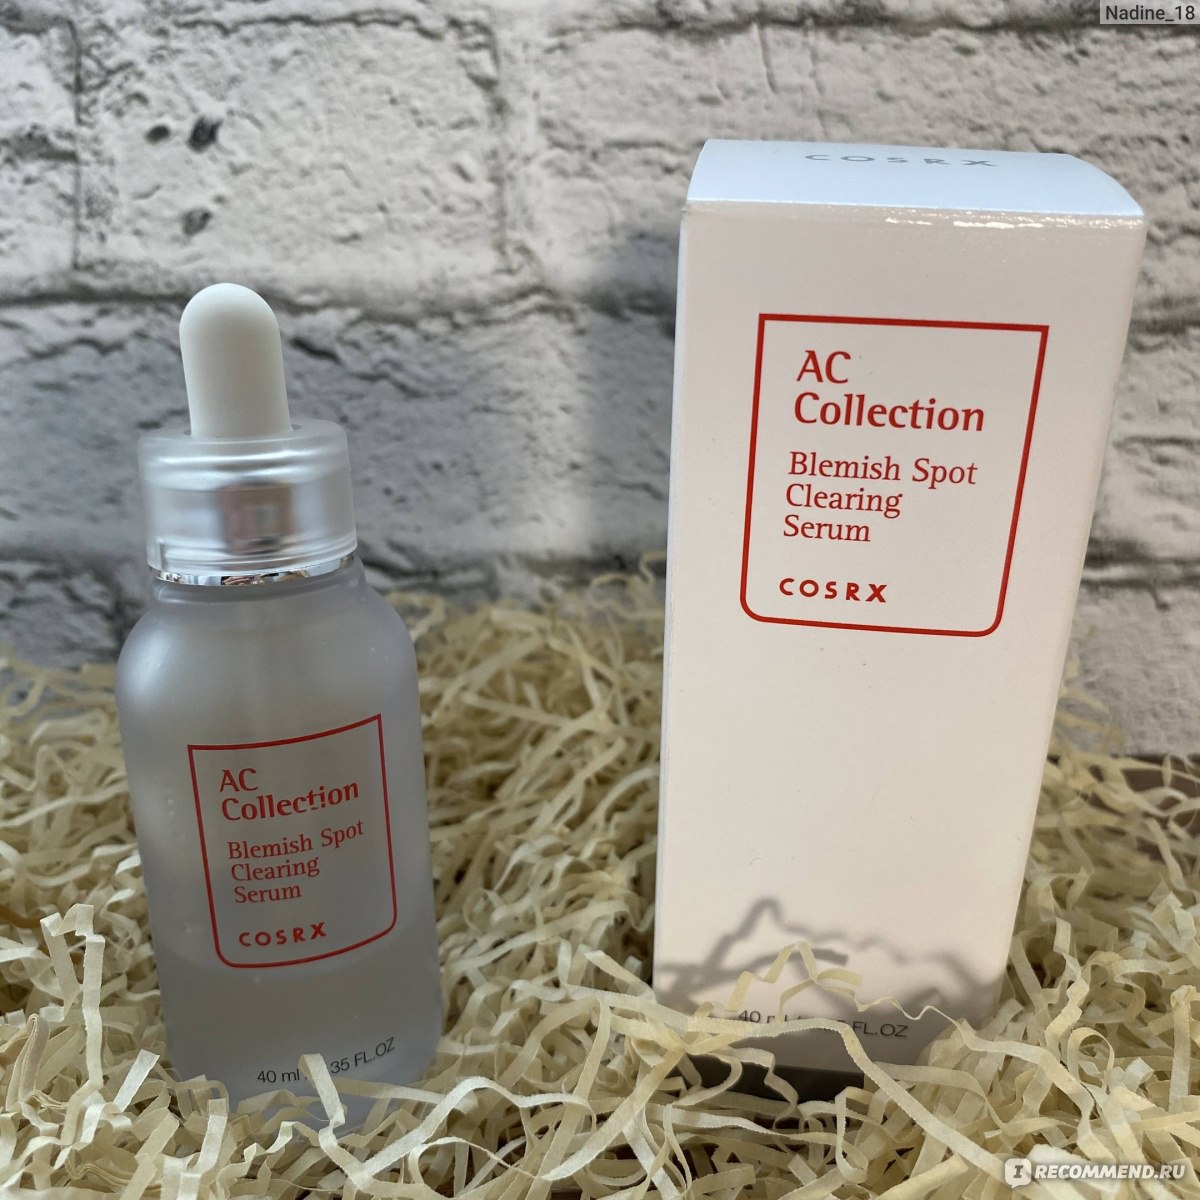 Ac collection. COSRX AC collection Blemish spot clearing Serum. AC collection Blemish spot clearing Serum. COSRX AC collection Blemish spot Drying Lotion. Сыворотка OSRX AC collection Blemish spot clearing Serum.